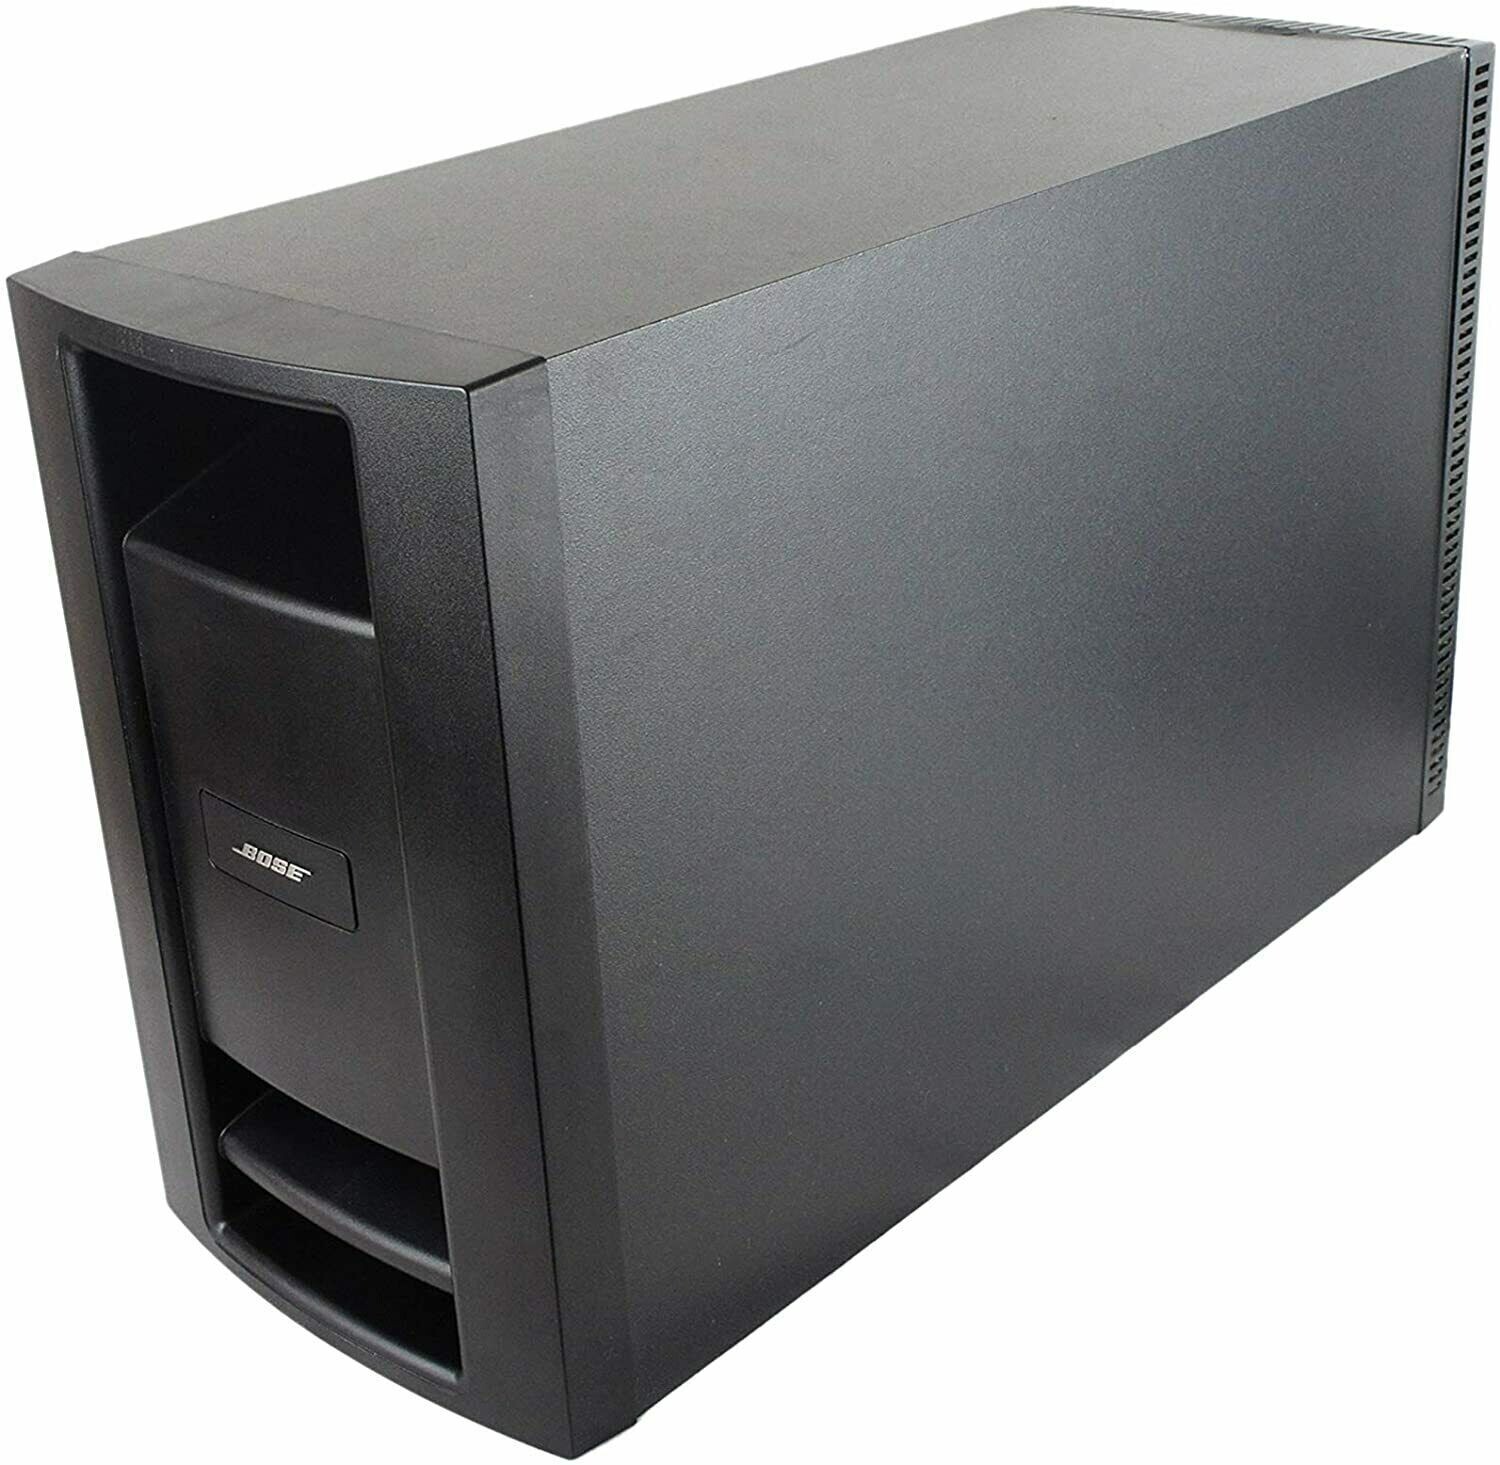 NEW  Bose Acoustimass module  Subwoofer for  Bose Lifestyle PS18 PS28 PS38 PS48 Series III